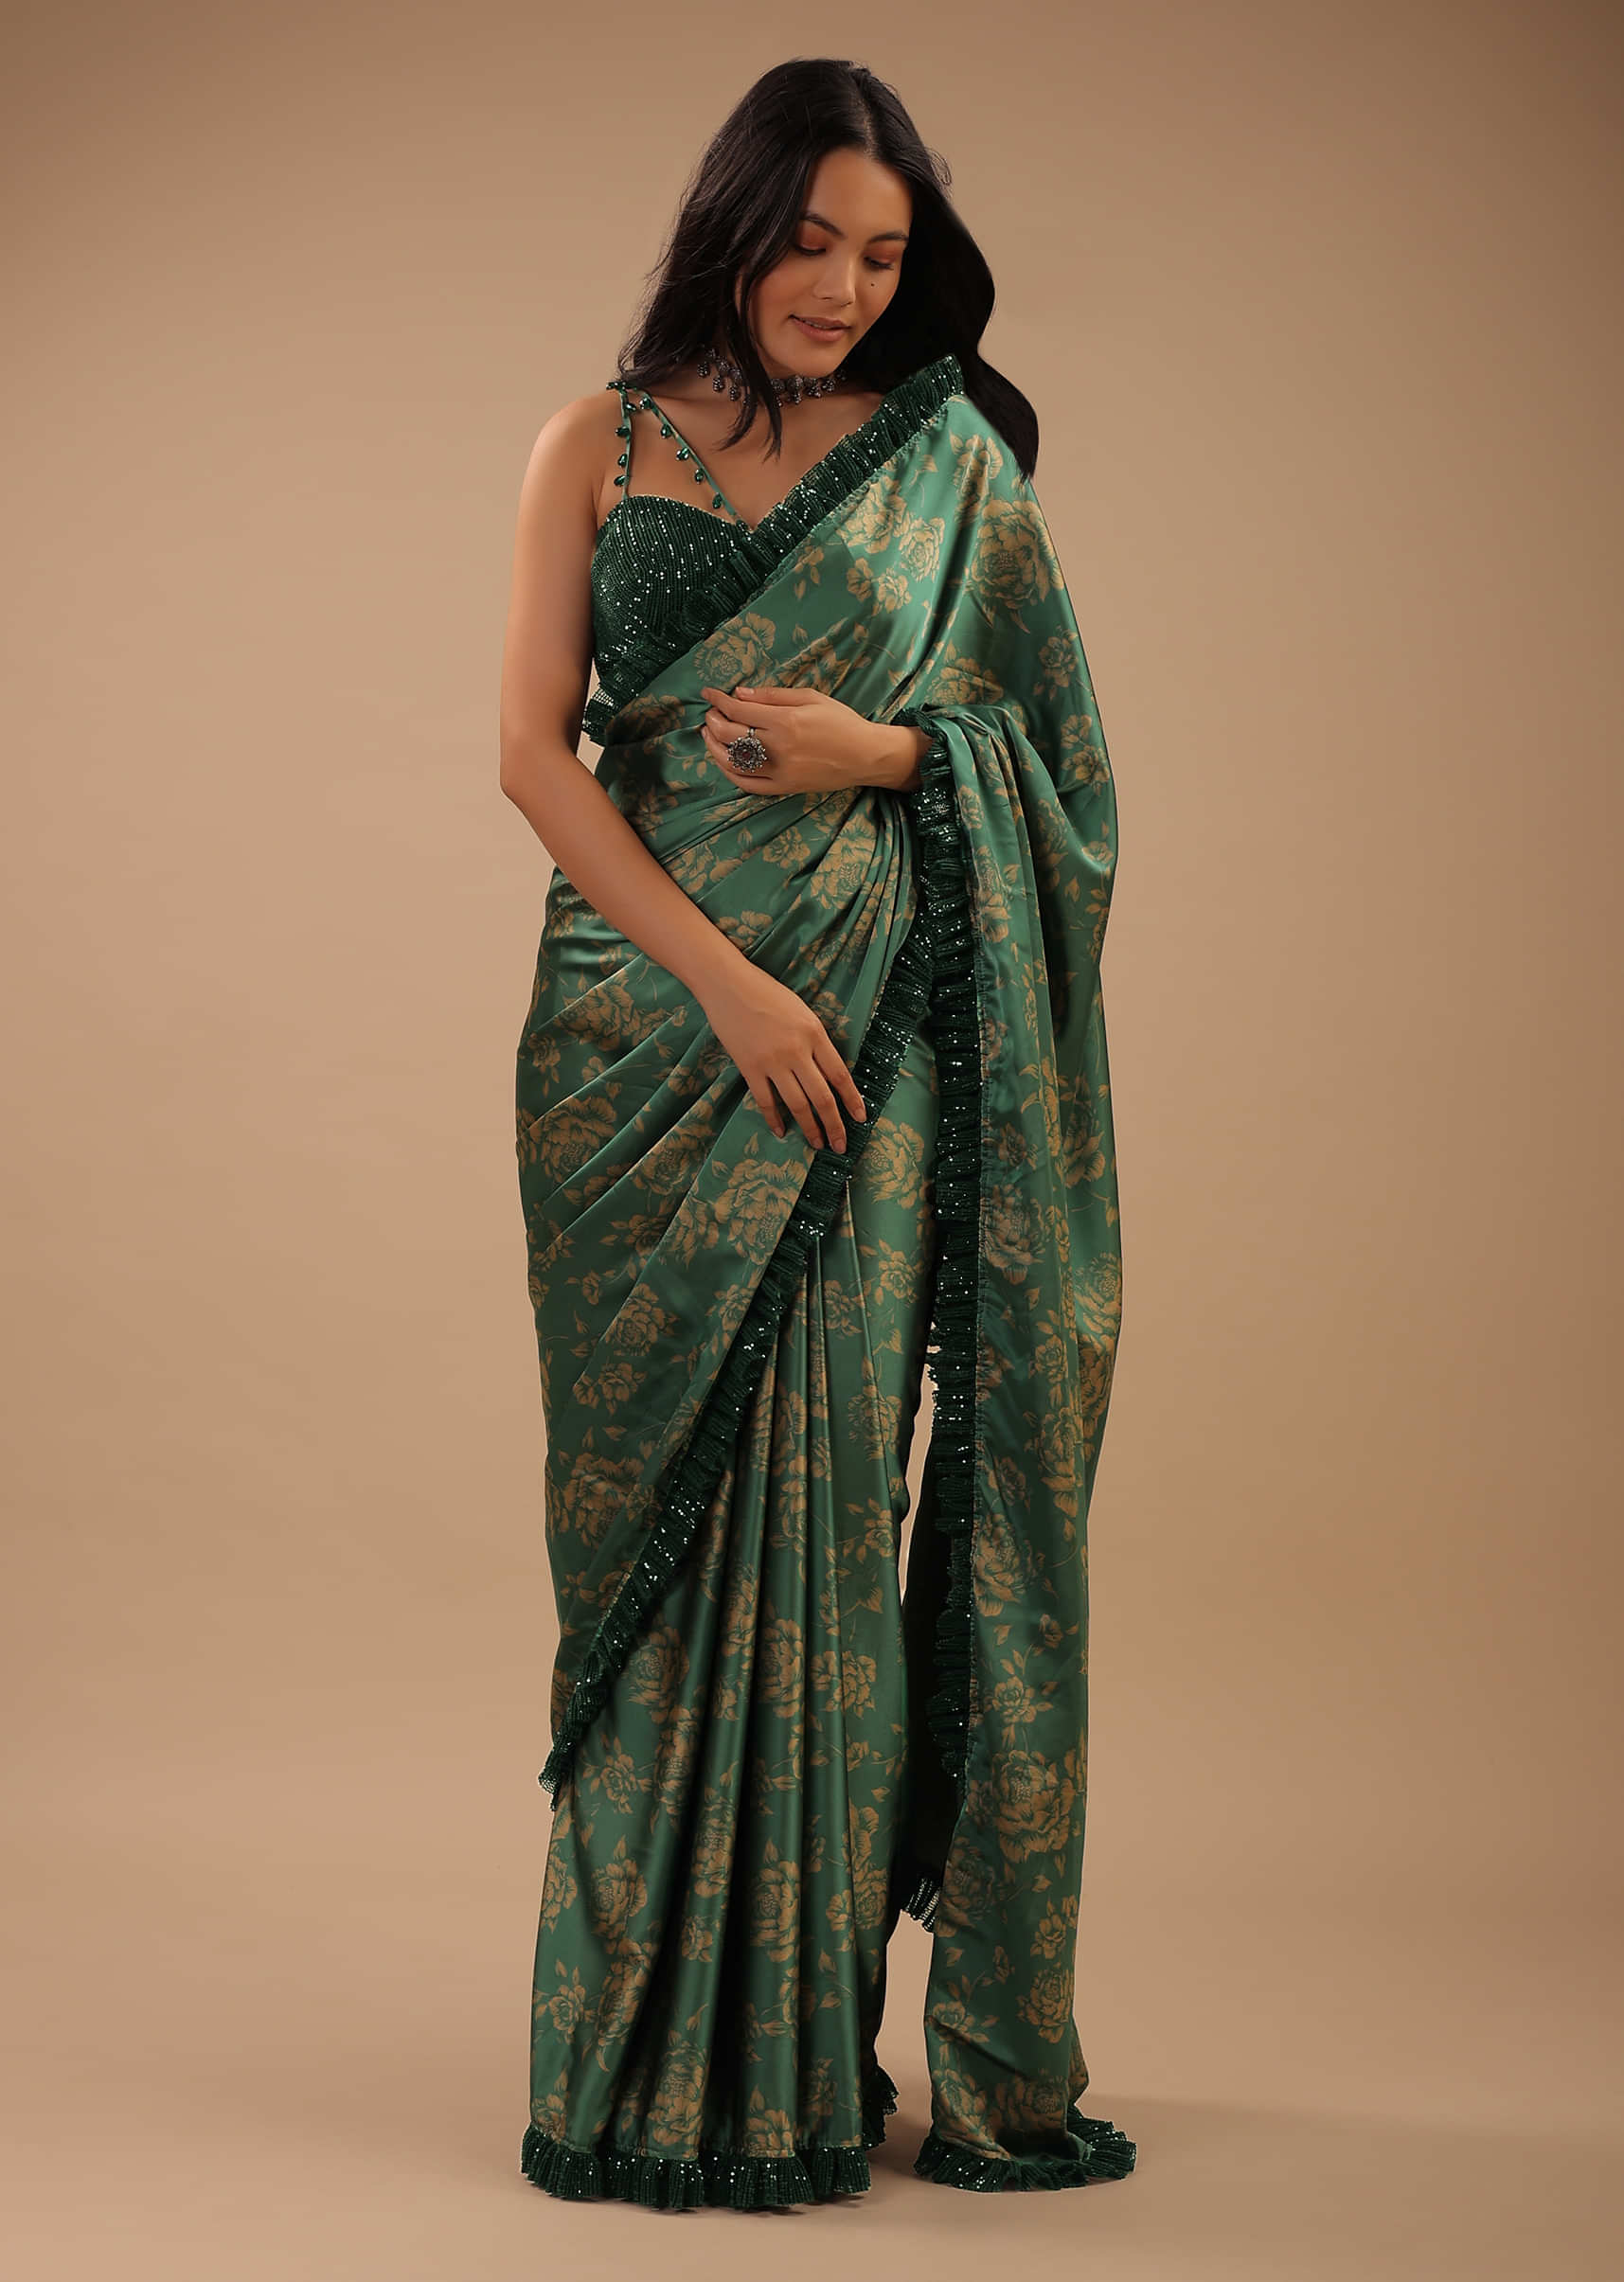 Beryl Green Satin Saree With Floral Print And Sequin Frill On The Border